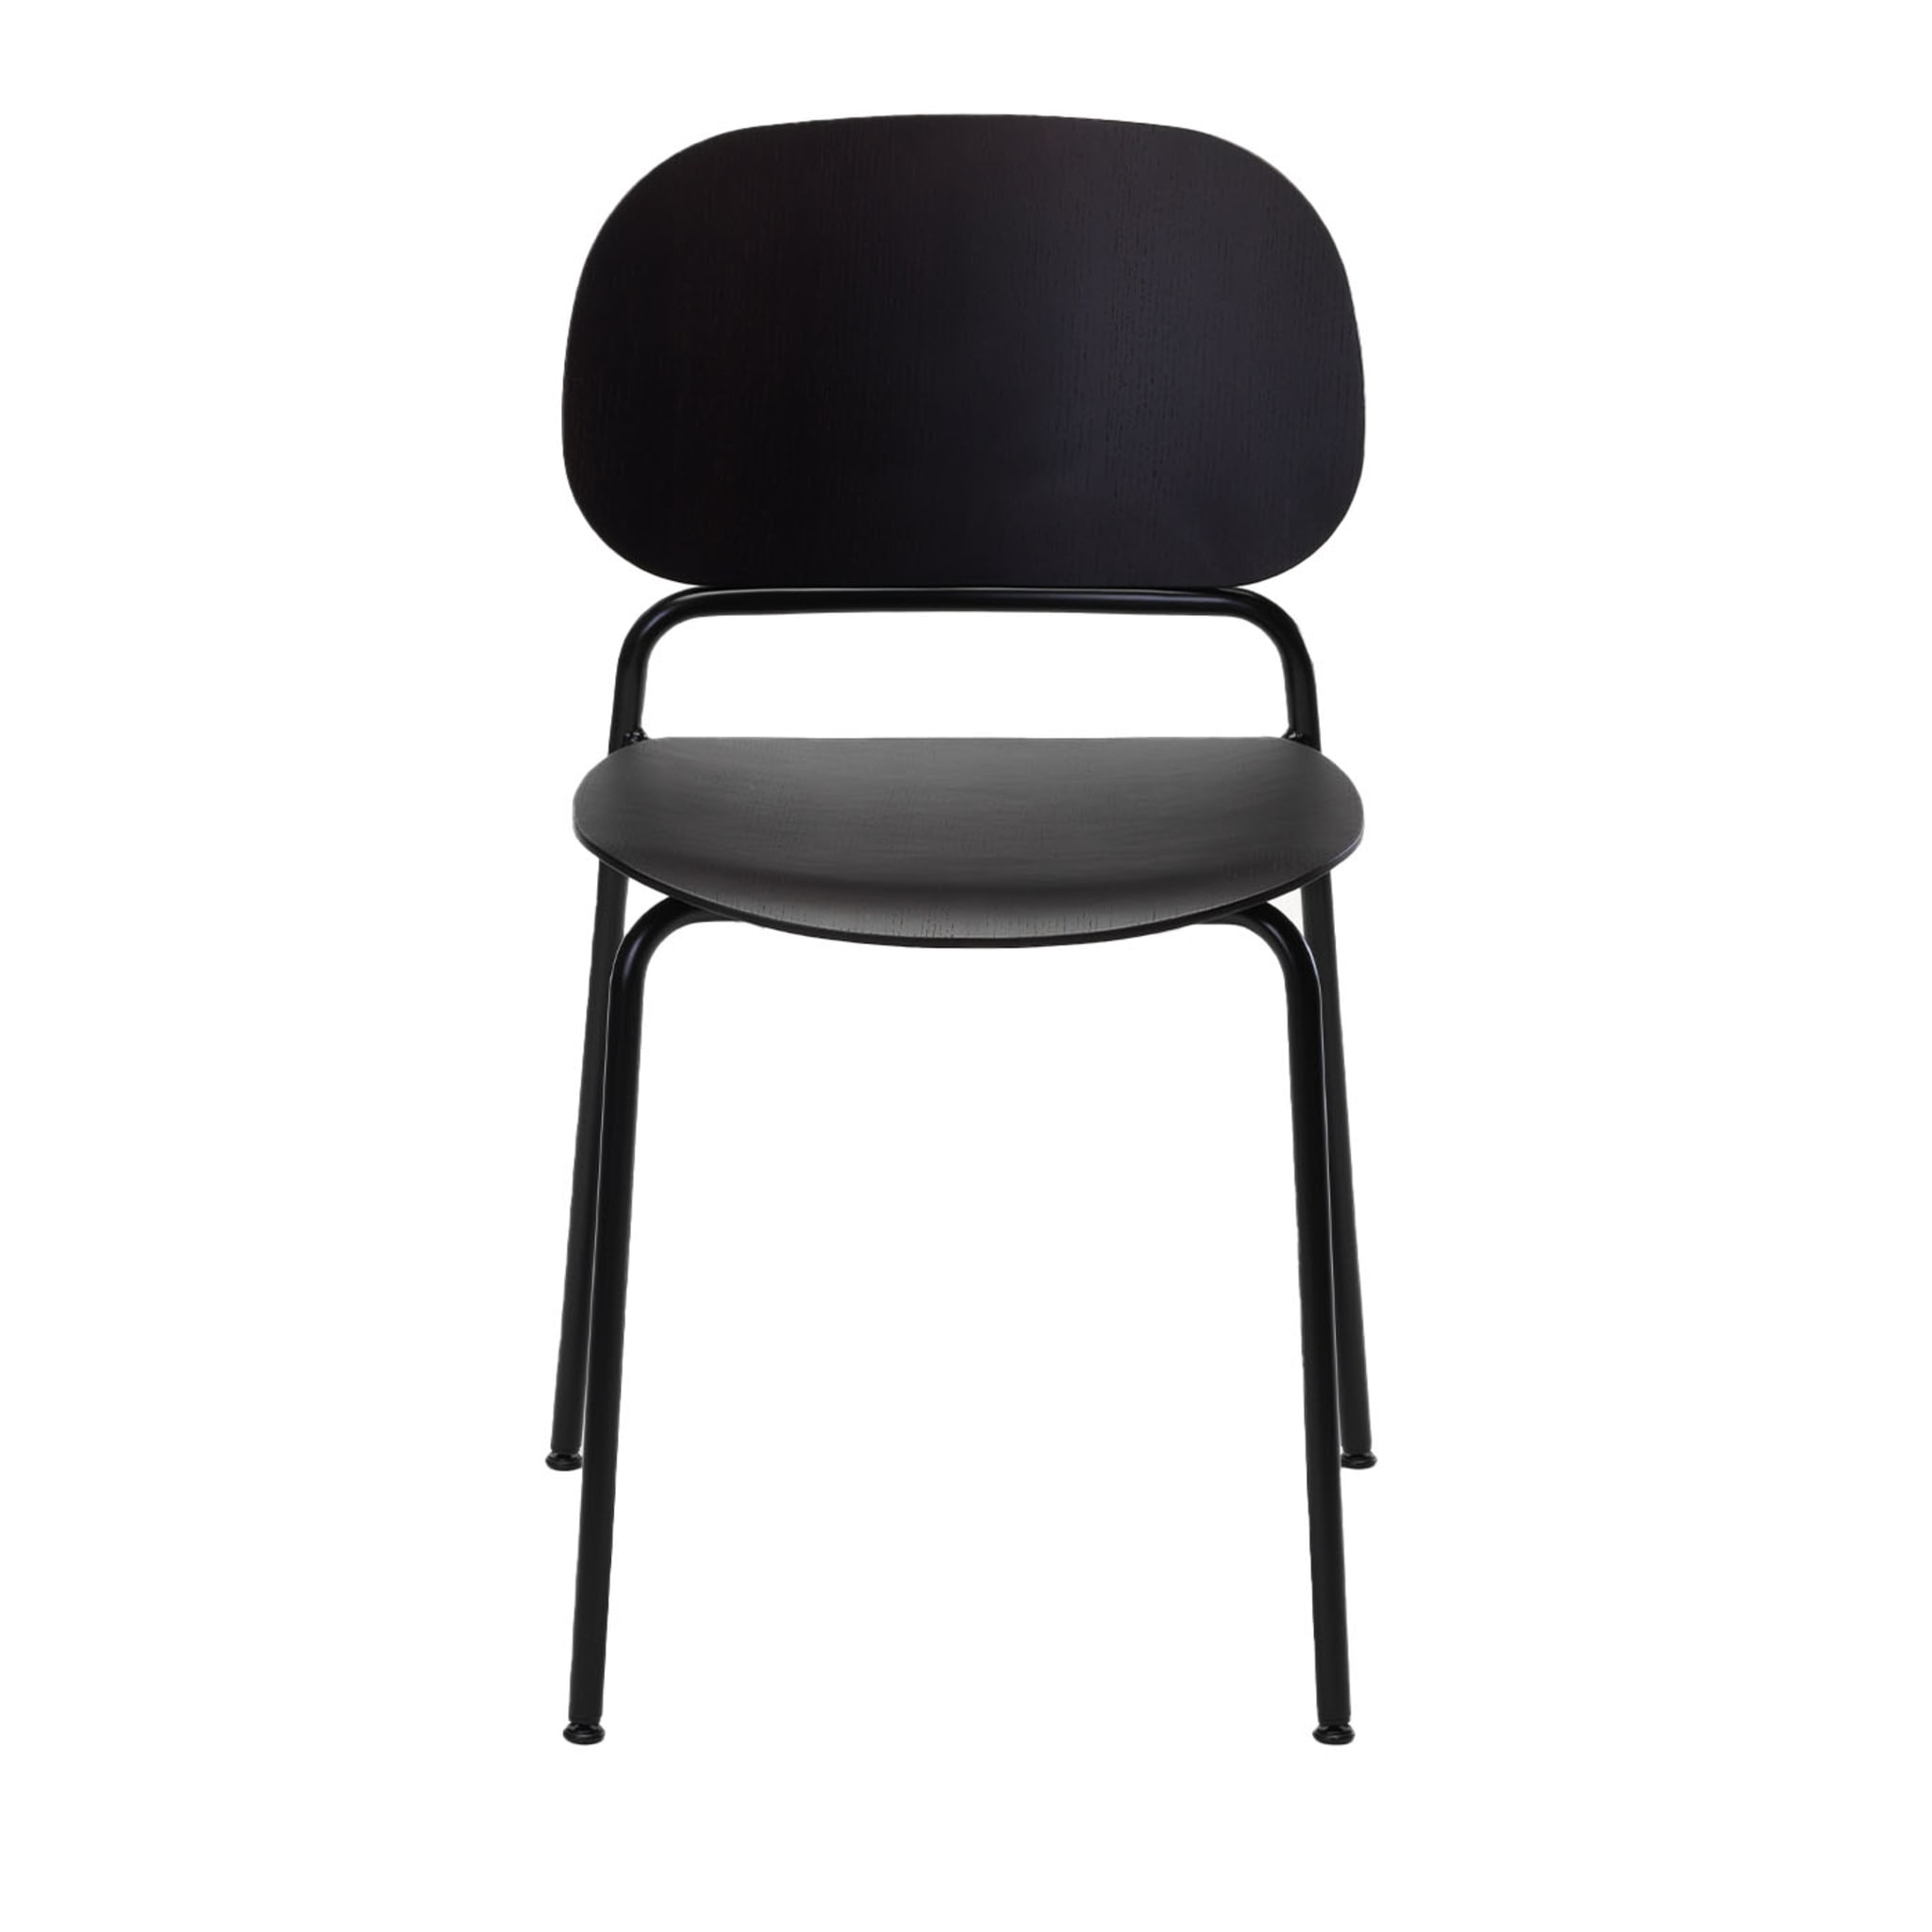 Set of 2 Upon Black Chairs by Sylvain Willenz - Main view